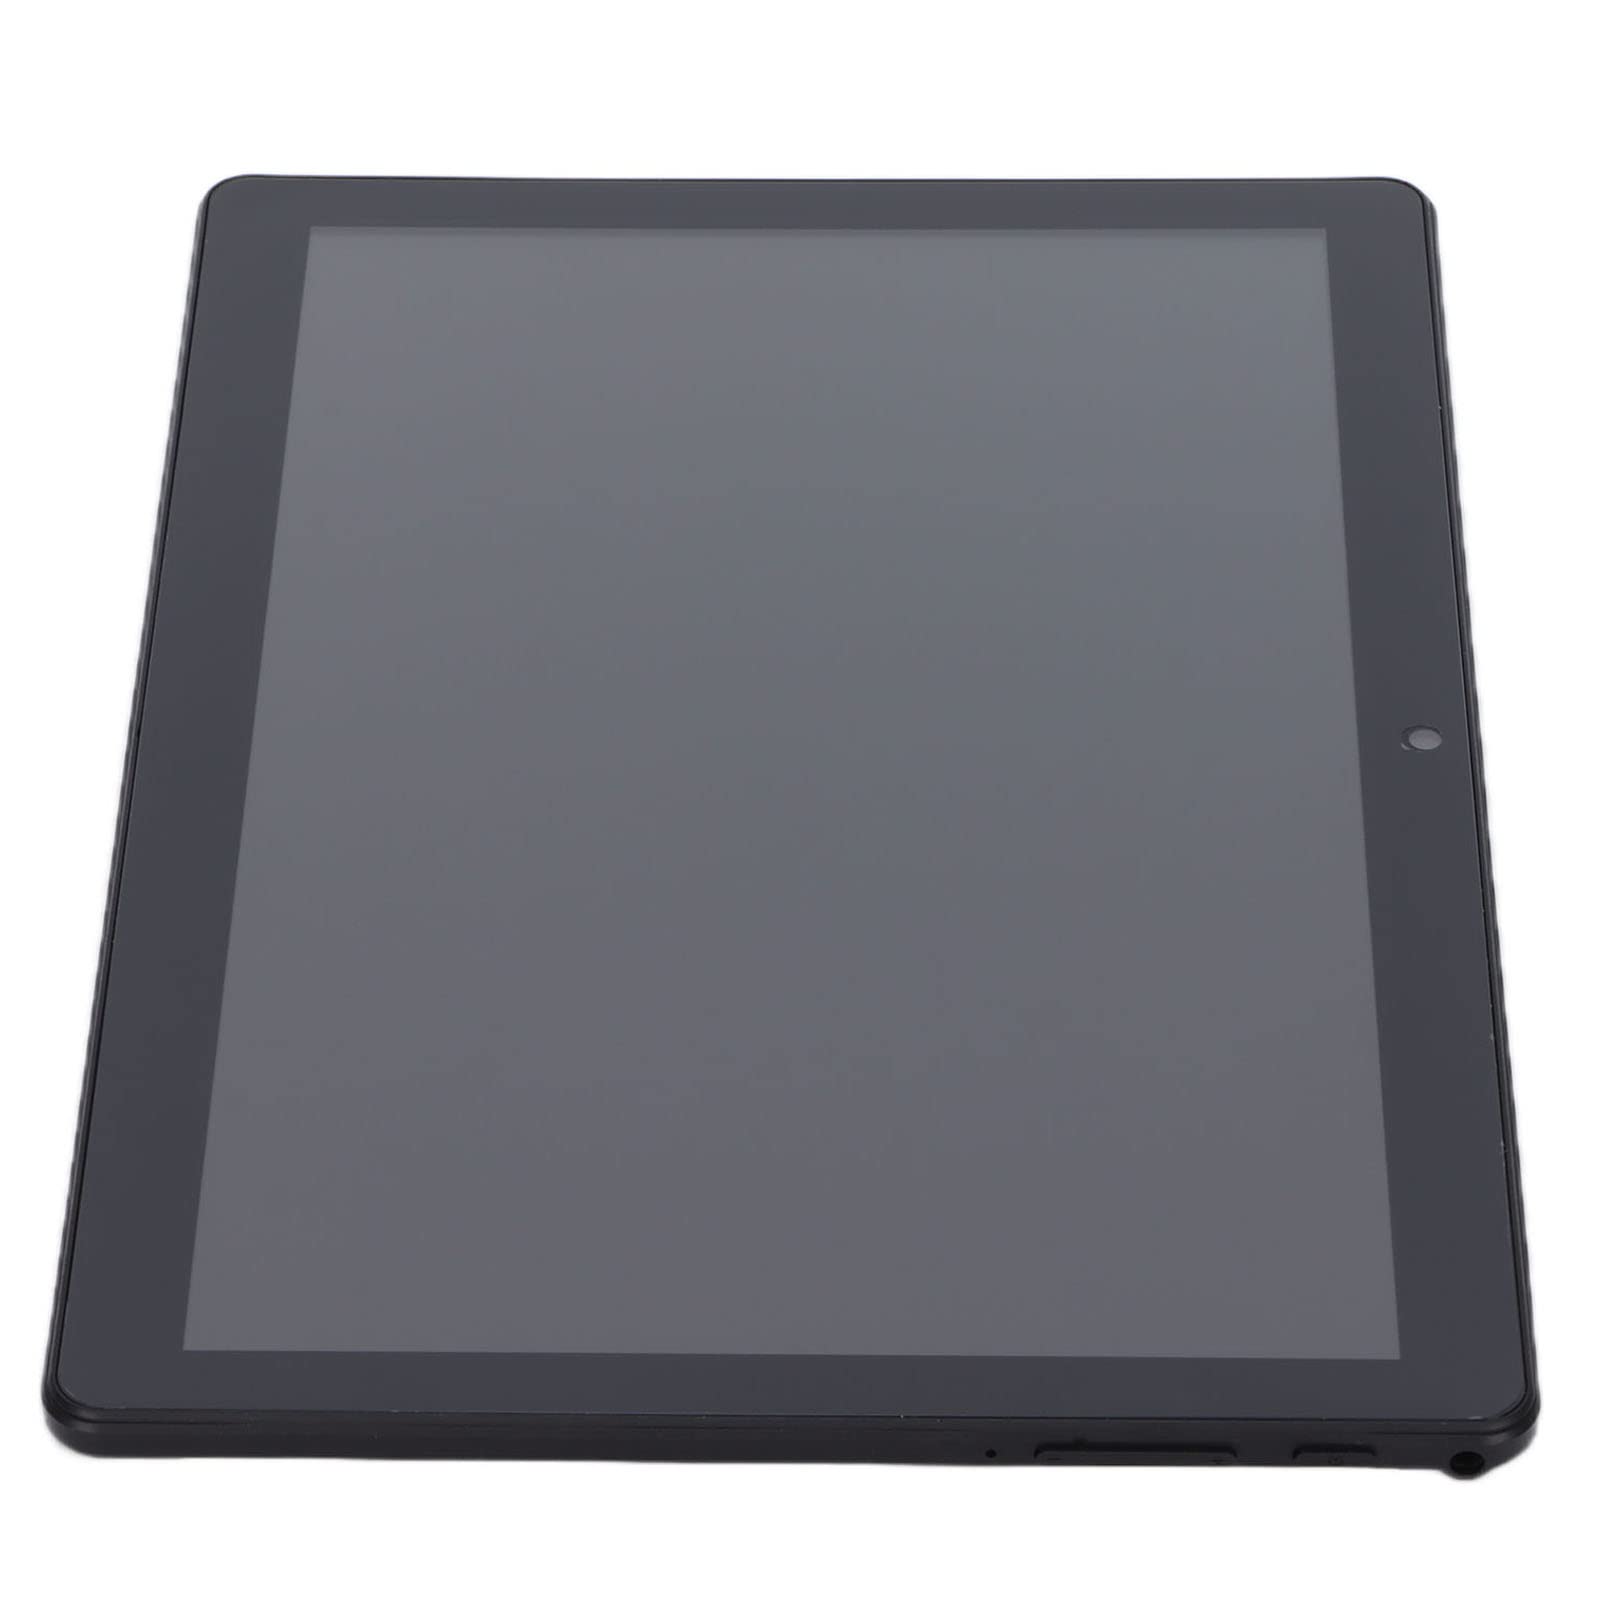 Tablet 10.1 Inch, SC9863A OctaCore Tablet PC, WiFi, 4GB RAM, 32GB Storage, 9.0, 1280x800 IPS LCD Screen, Dual SIM Card Tablet PC (Black)